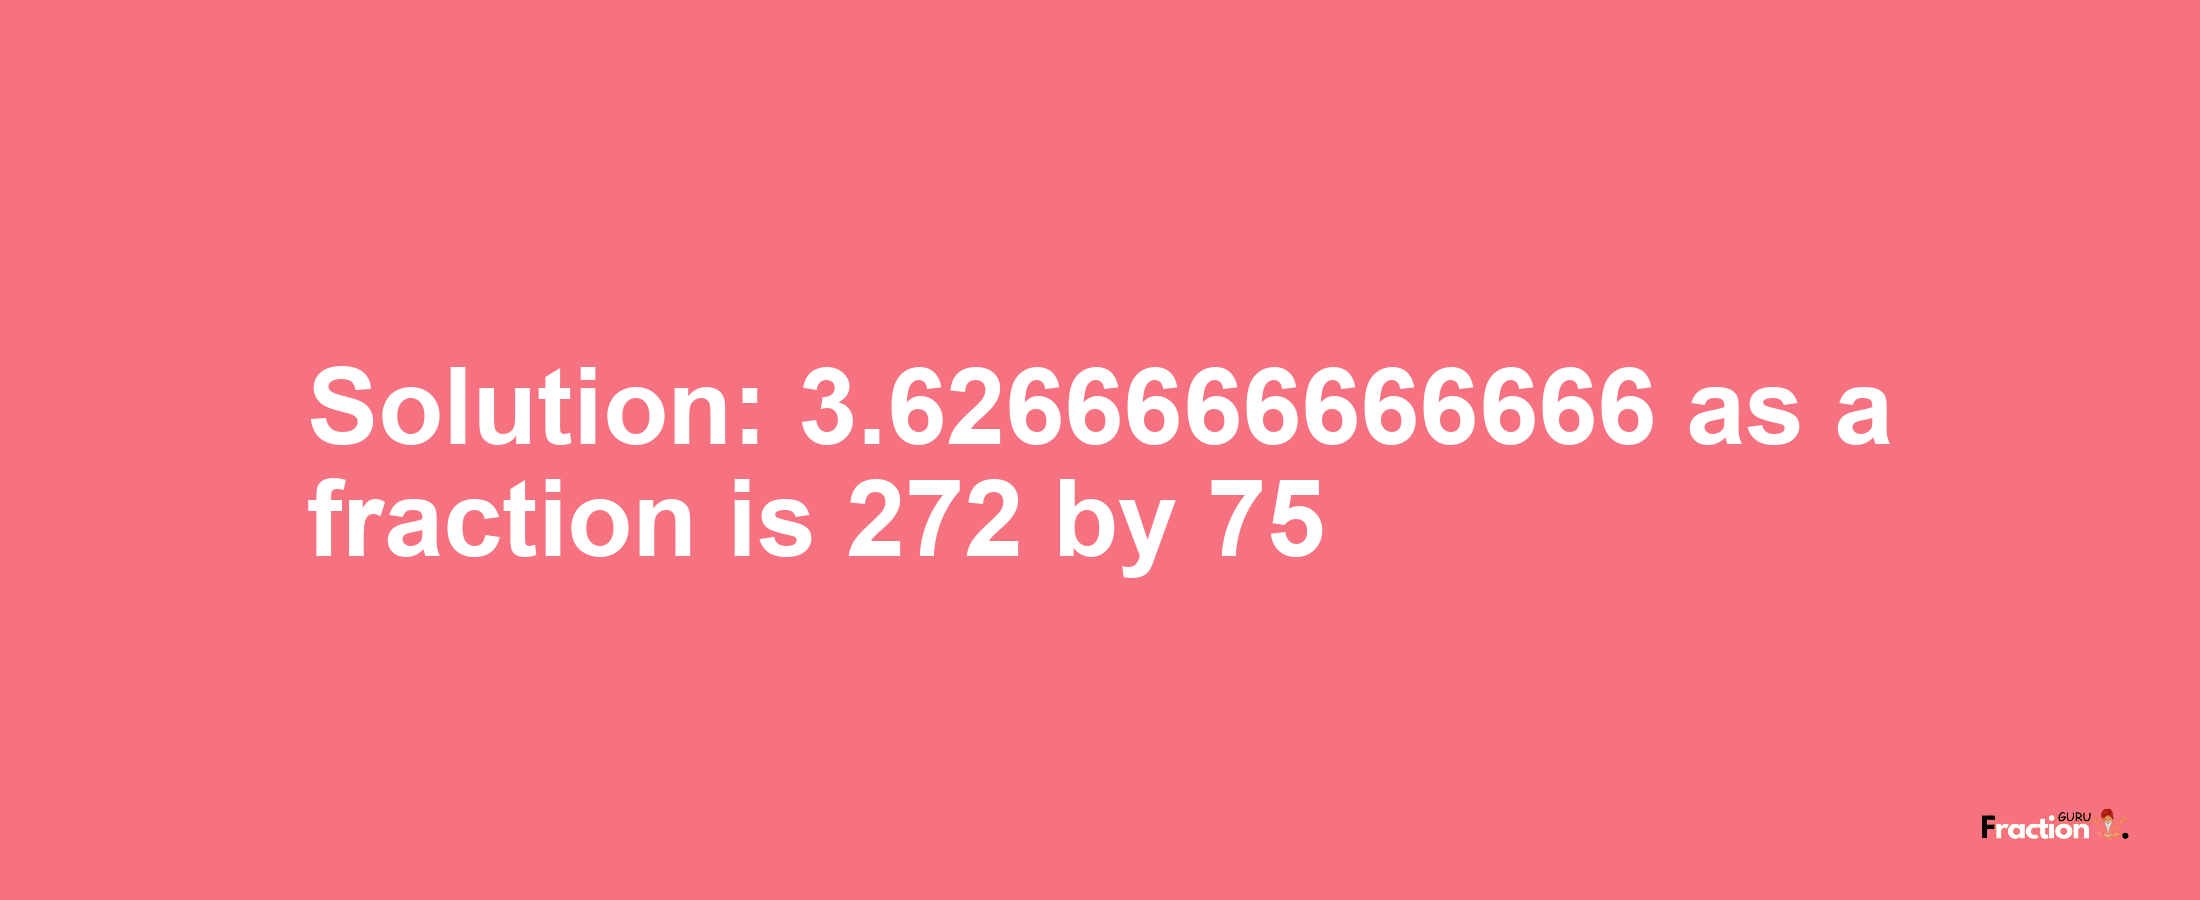 Solution:3.6266666666666 as a fraction is 272/75